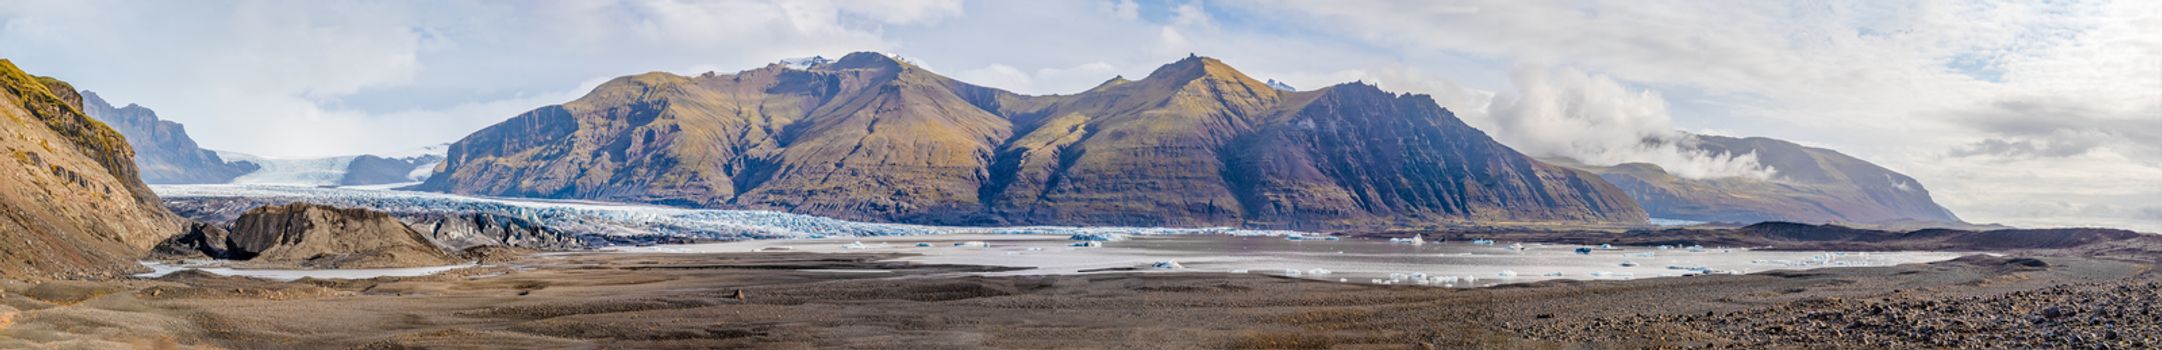 Vatnajoekull glacier in Iceland panorama of glacier and its lake filled with molten ice during sunny day